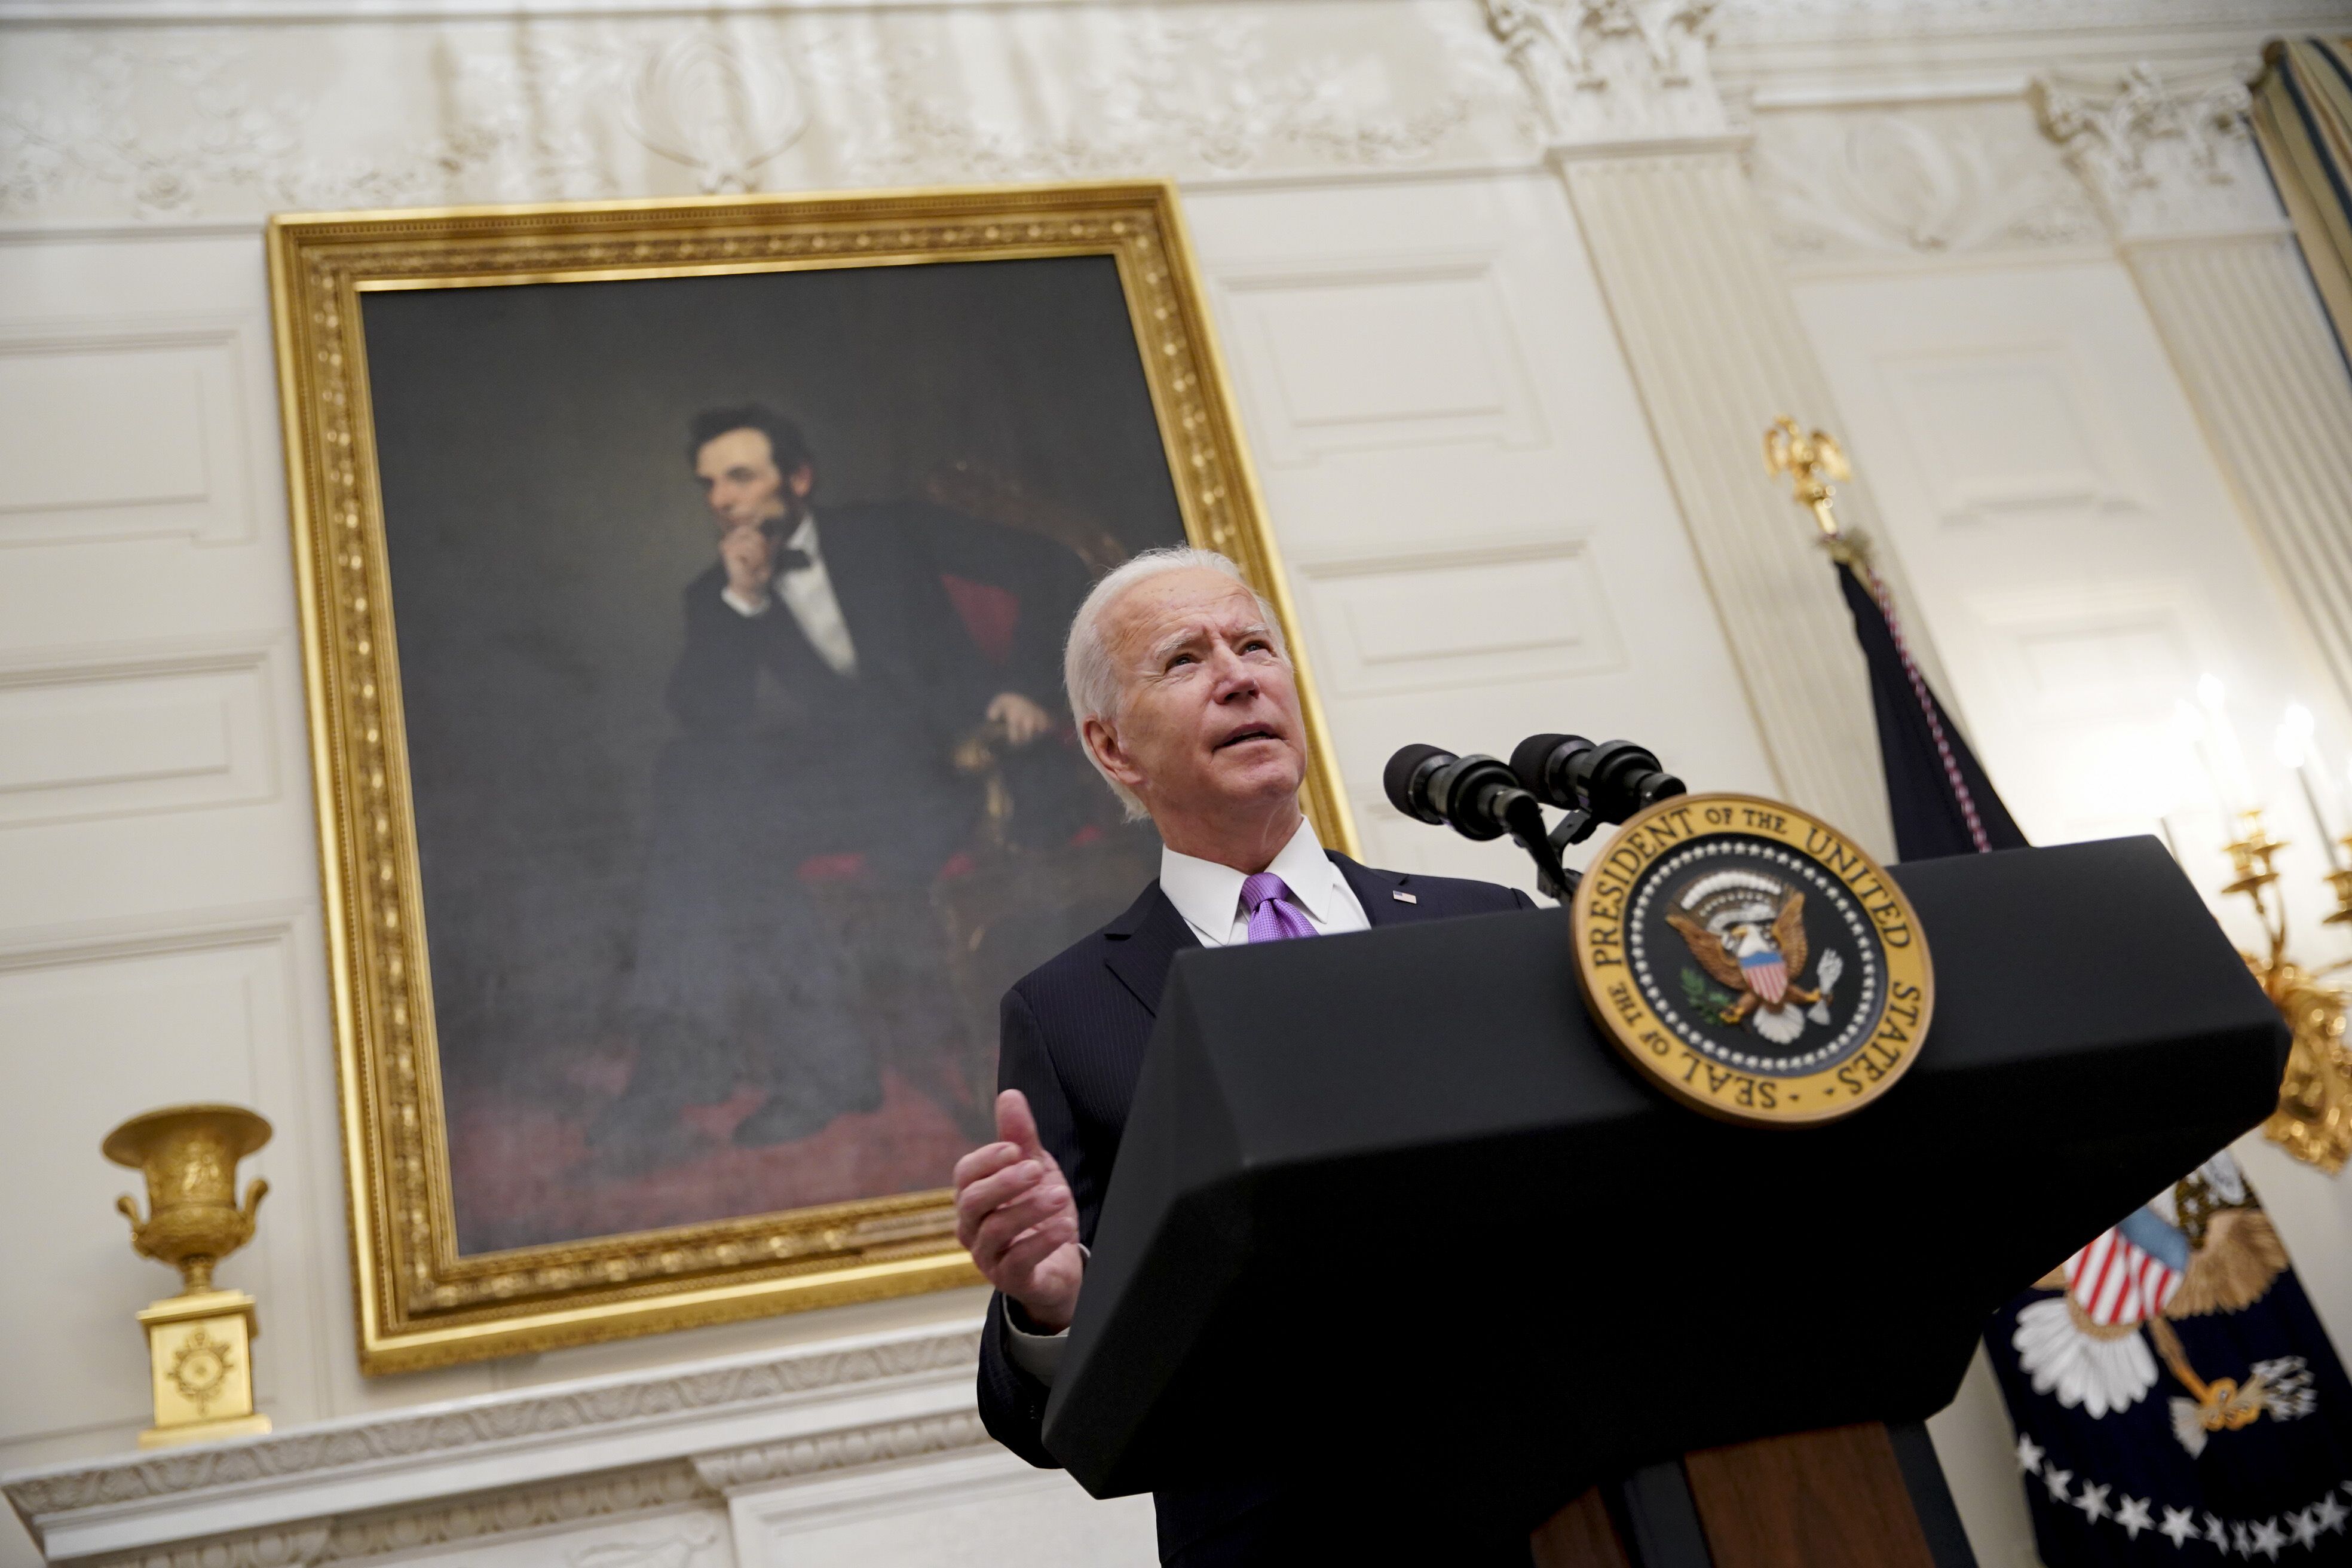 COVID-19 is focus on Biden's first full day - The Boston Globe